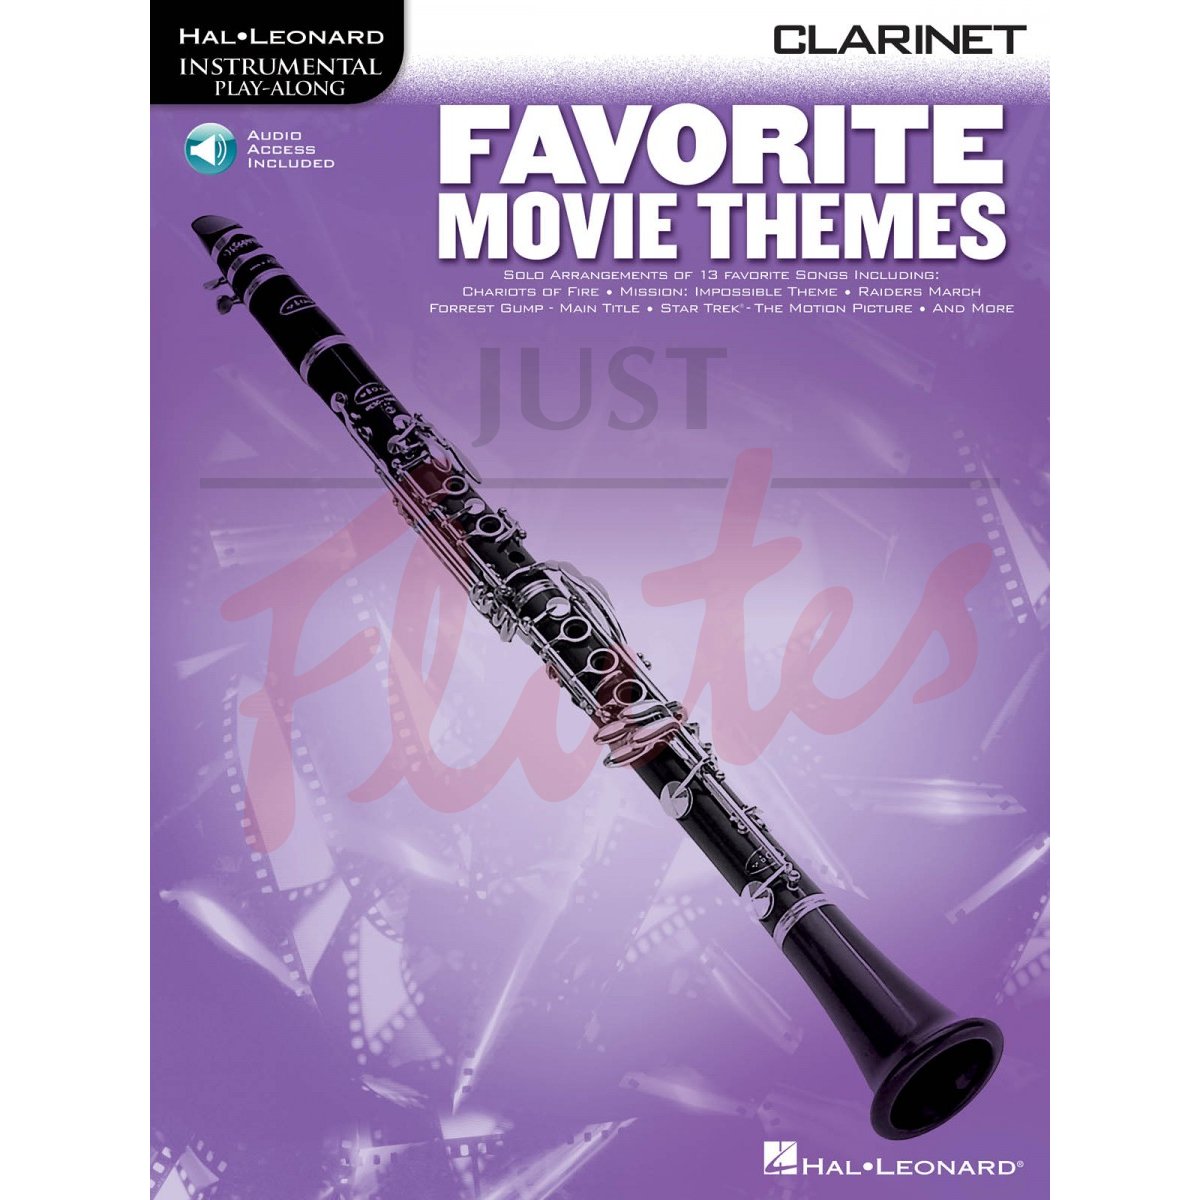 Favourite Movie Themes Play-Along for Clarinet